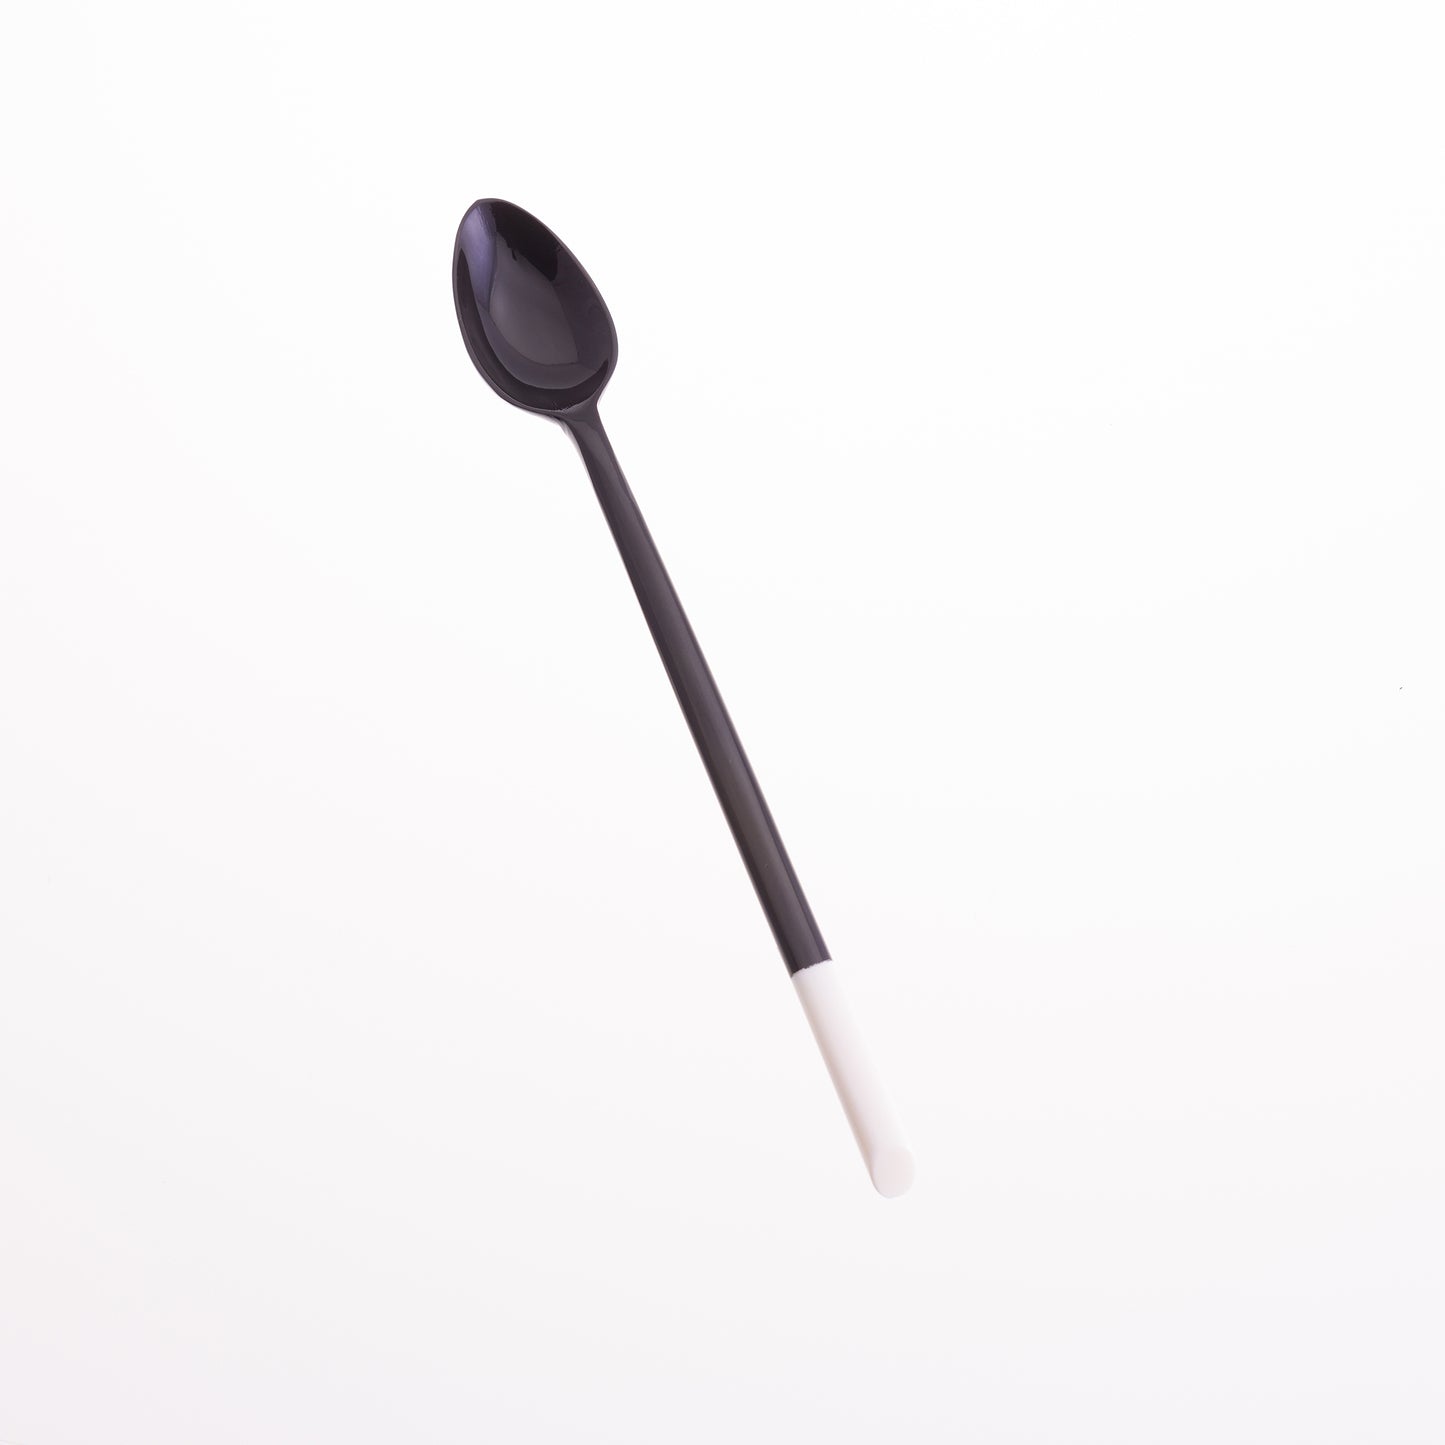 Long handled jam spoon made from black water buffalo horn with a bone tip.